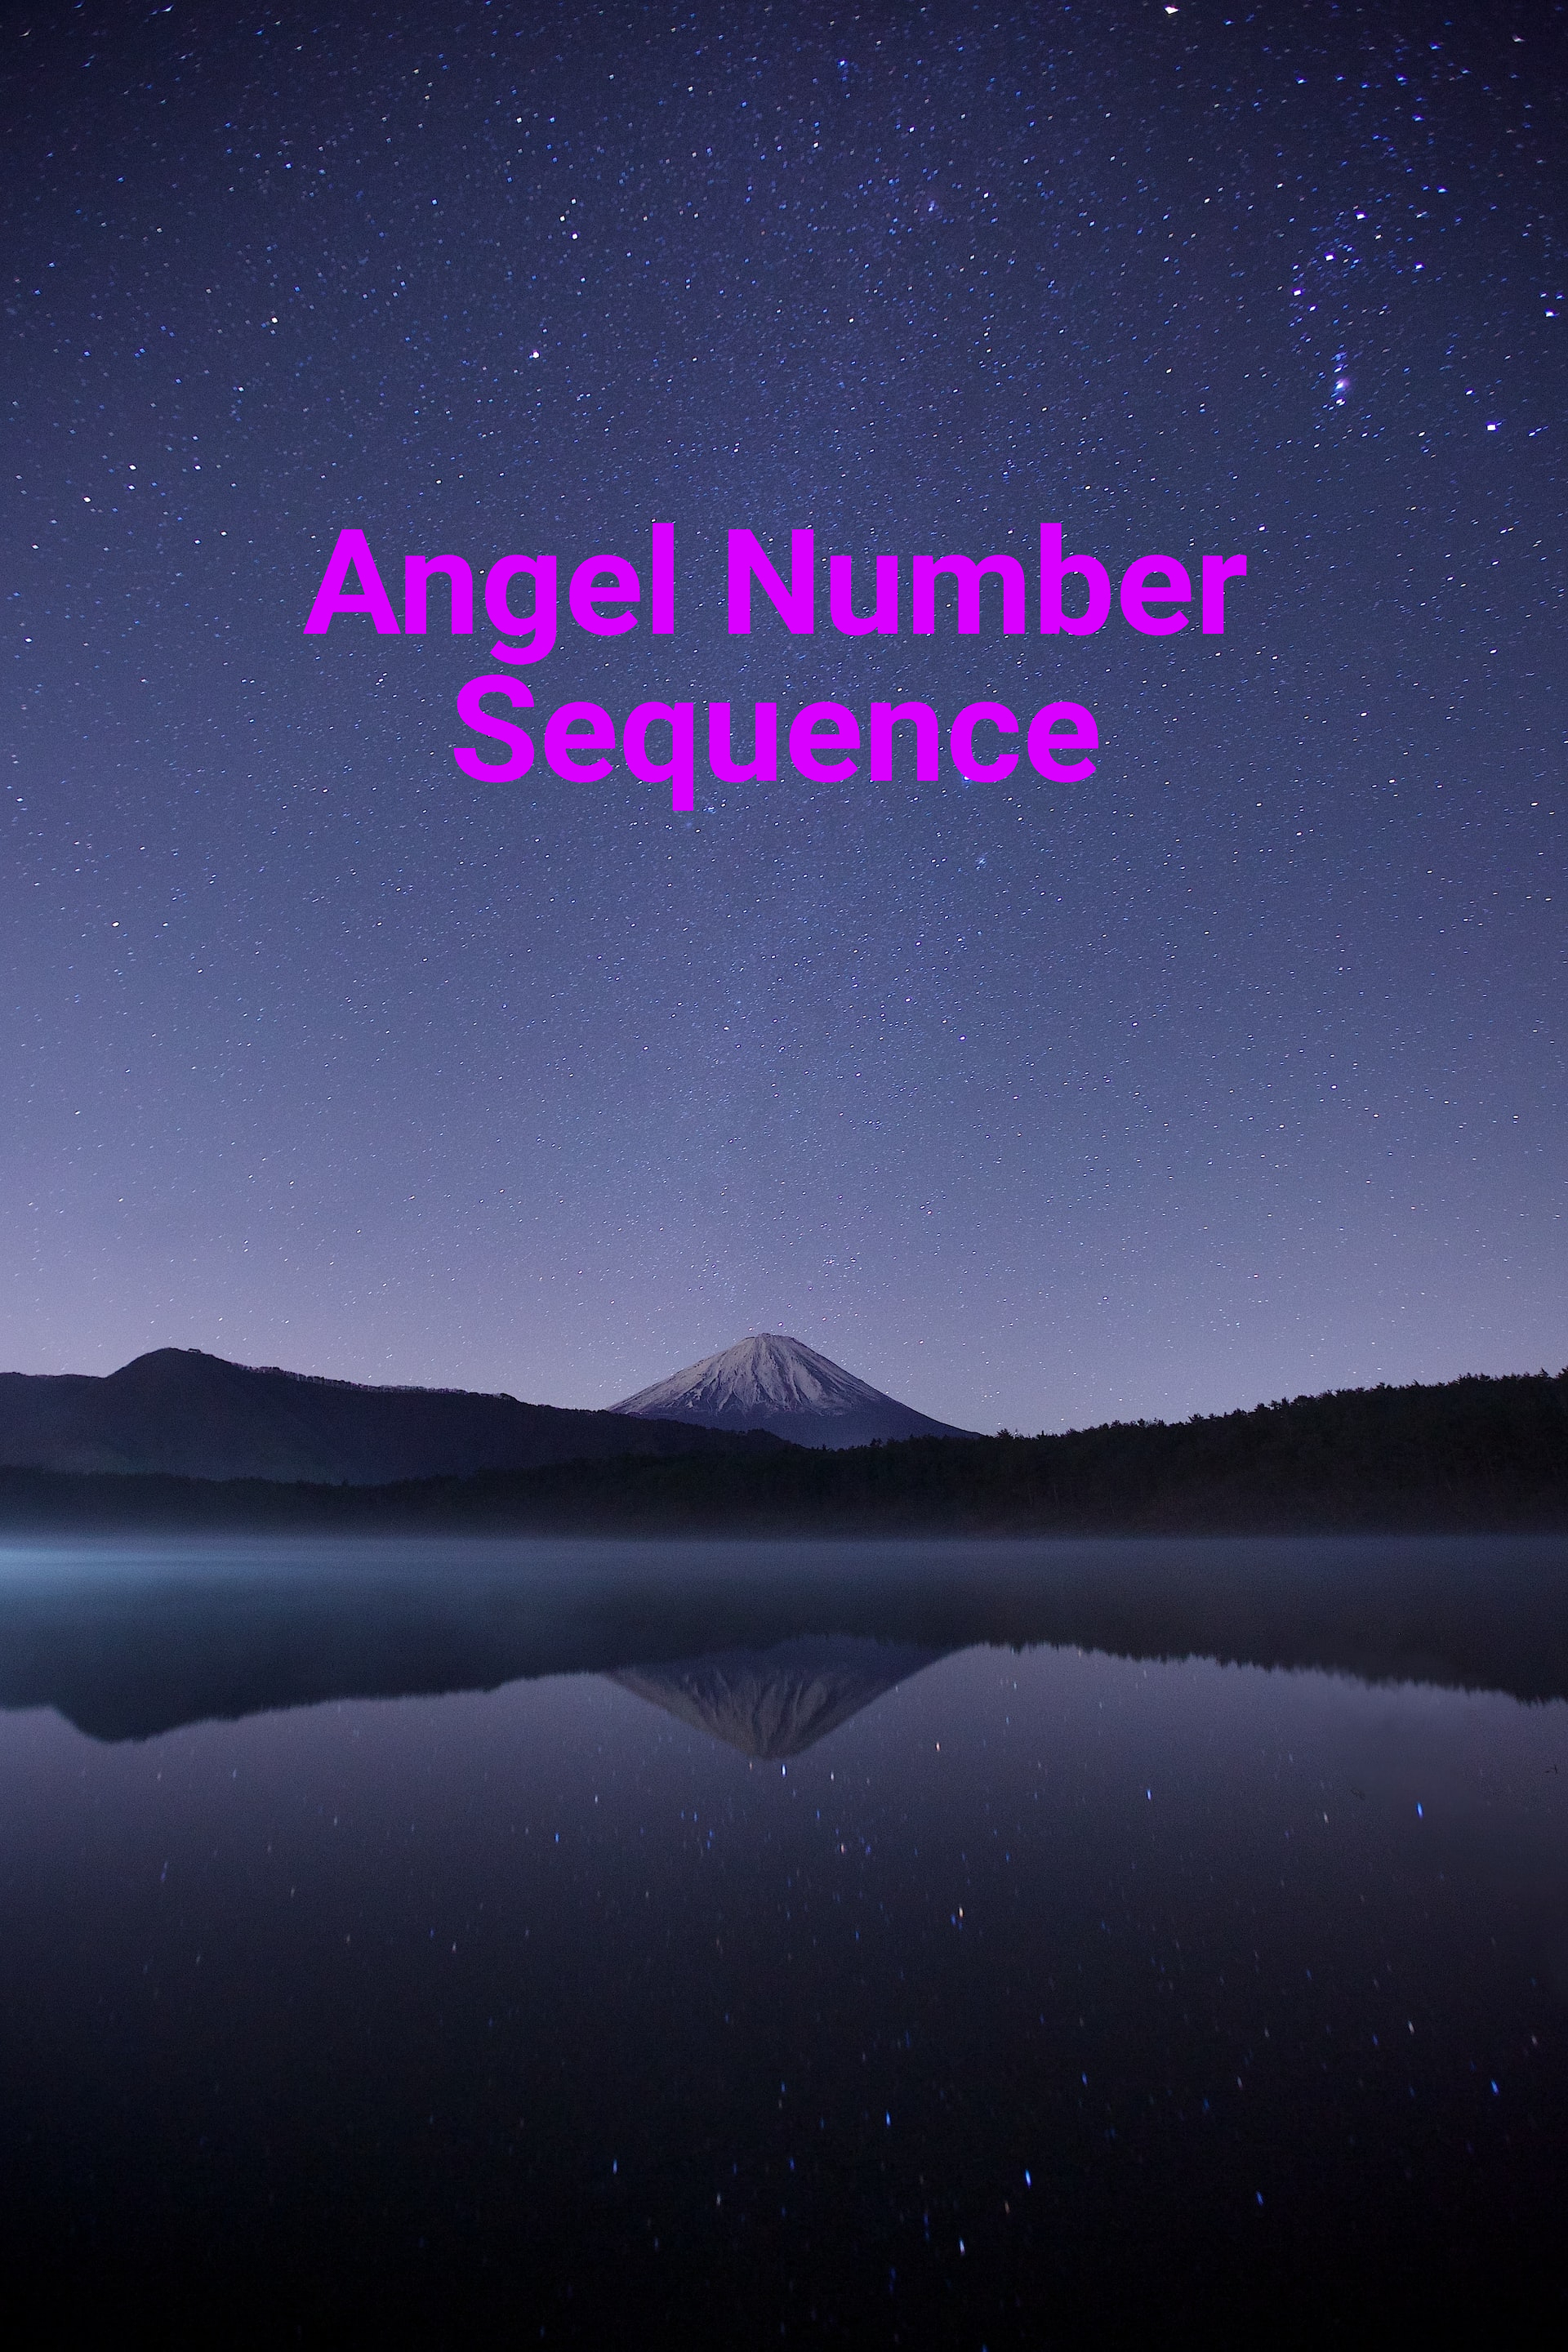 What Is An Angel Number Sequence And How Do They Work?